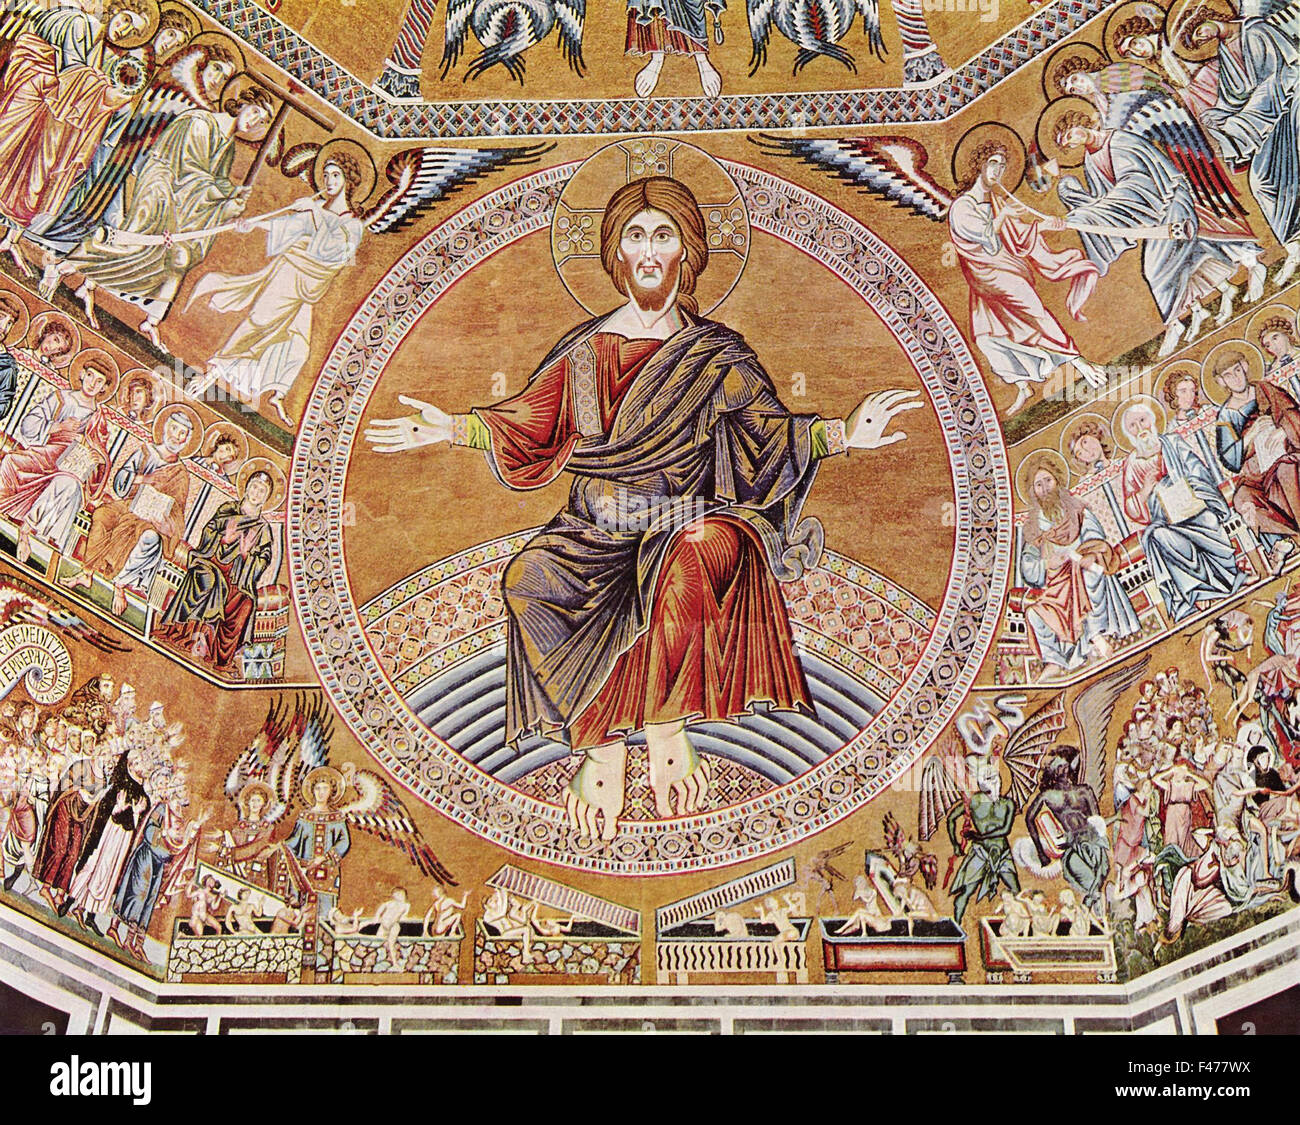 5782. Scene from the mosaic ceiling of the baptistery of San Giovanni, Florence. Jesus and the Last Judgement. C. 12th. C. Stock Photo